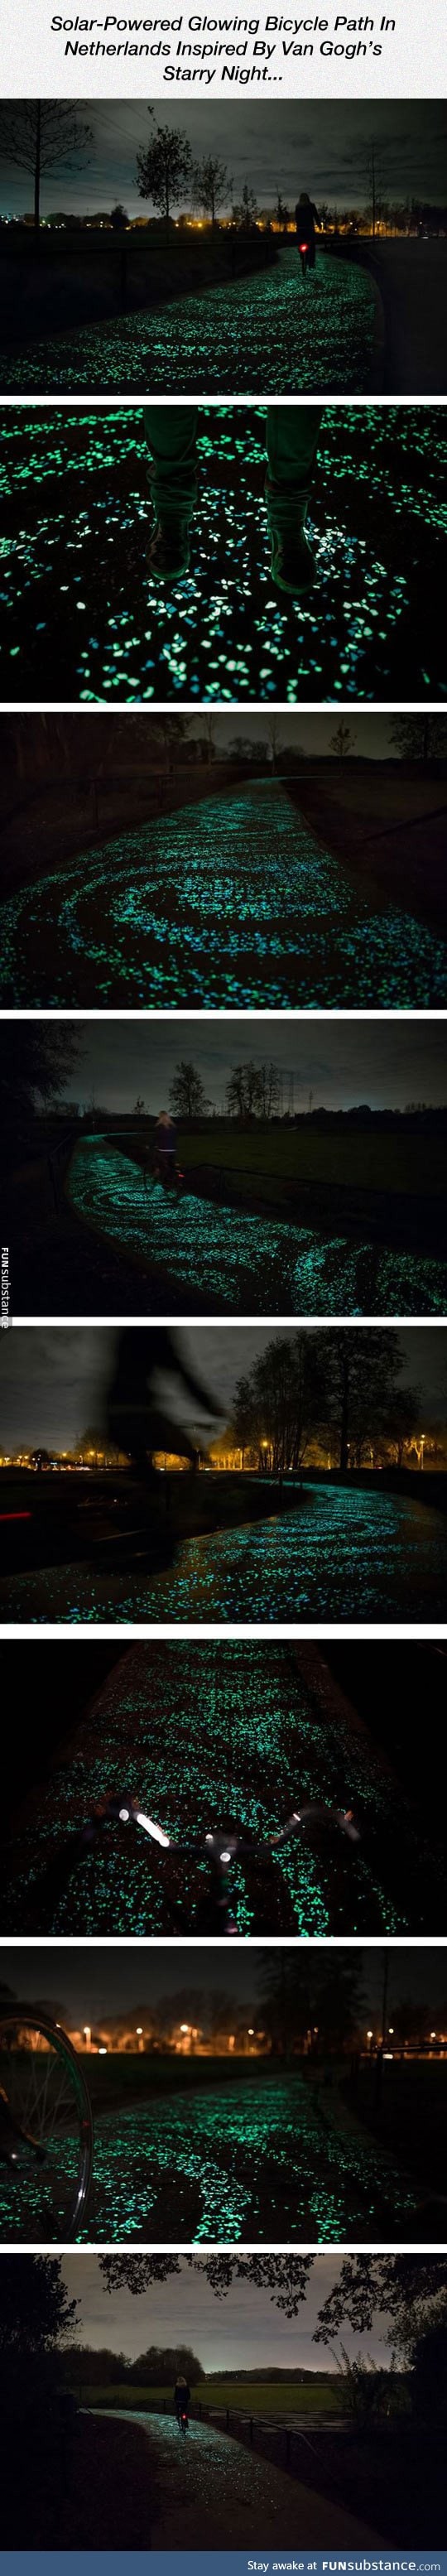 Glowing bicycle path